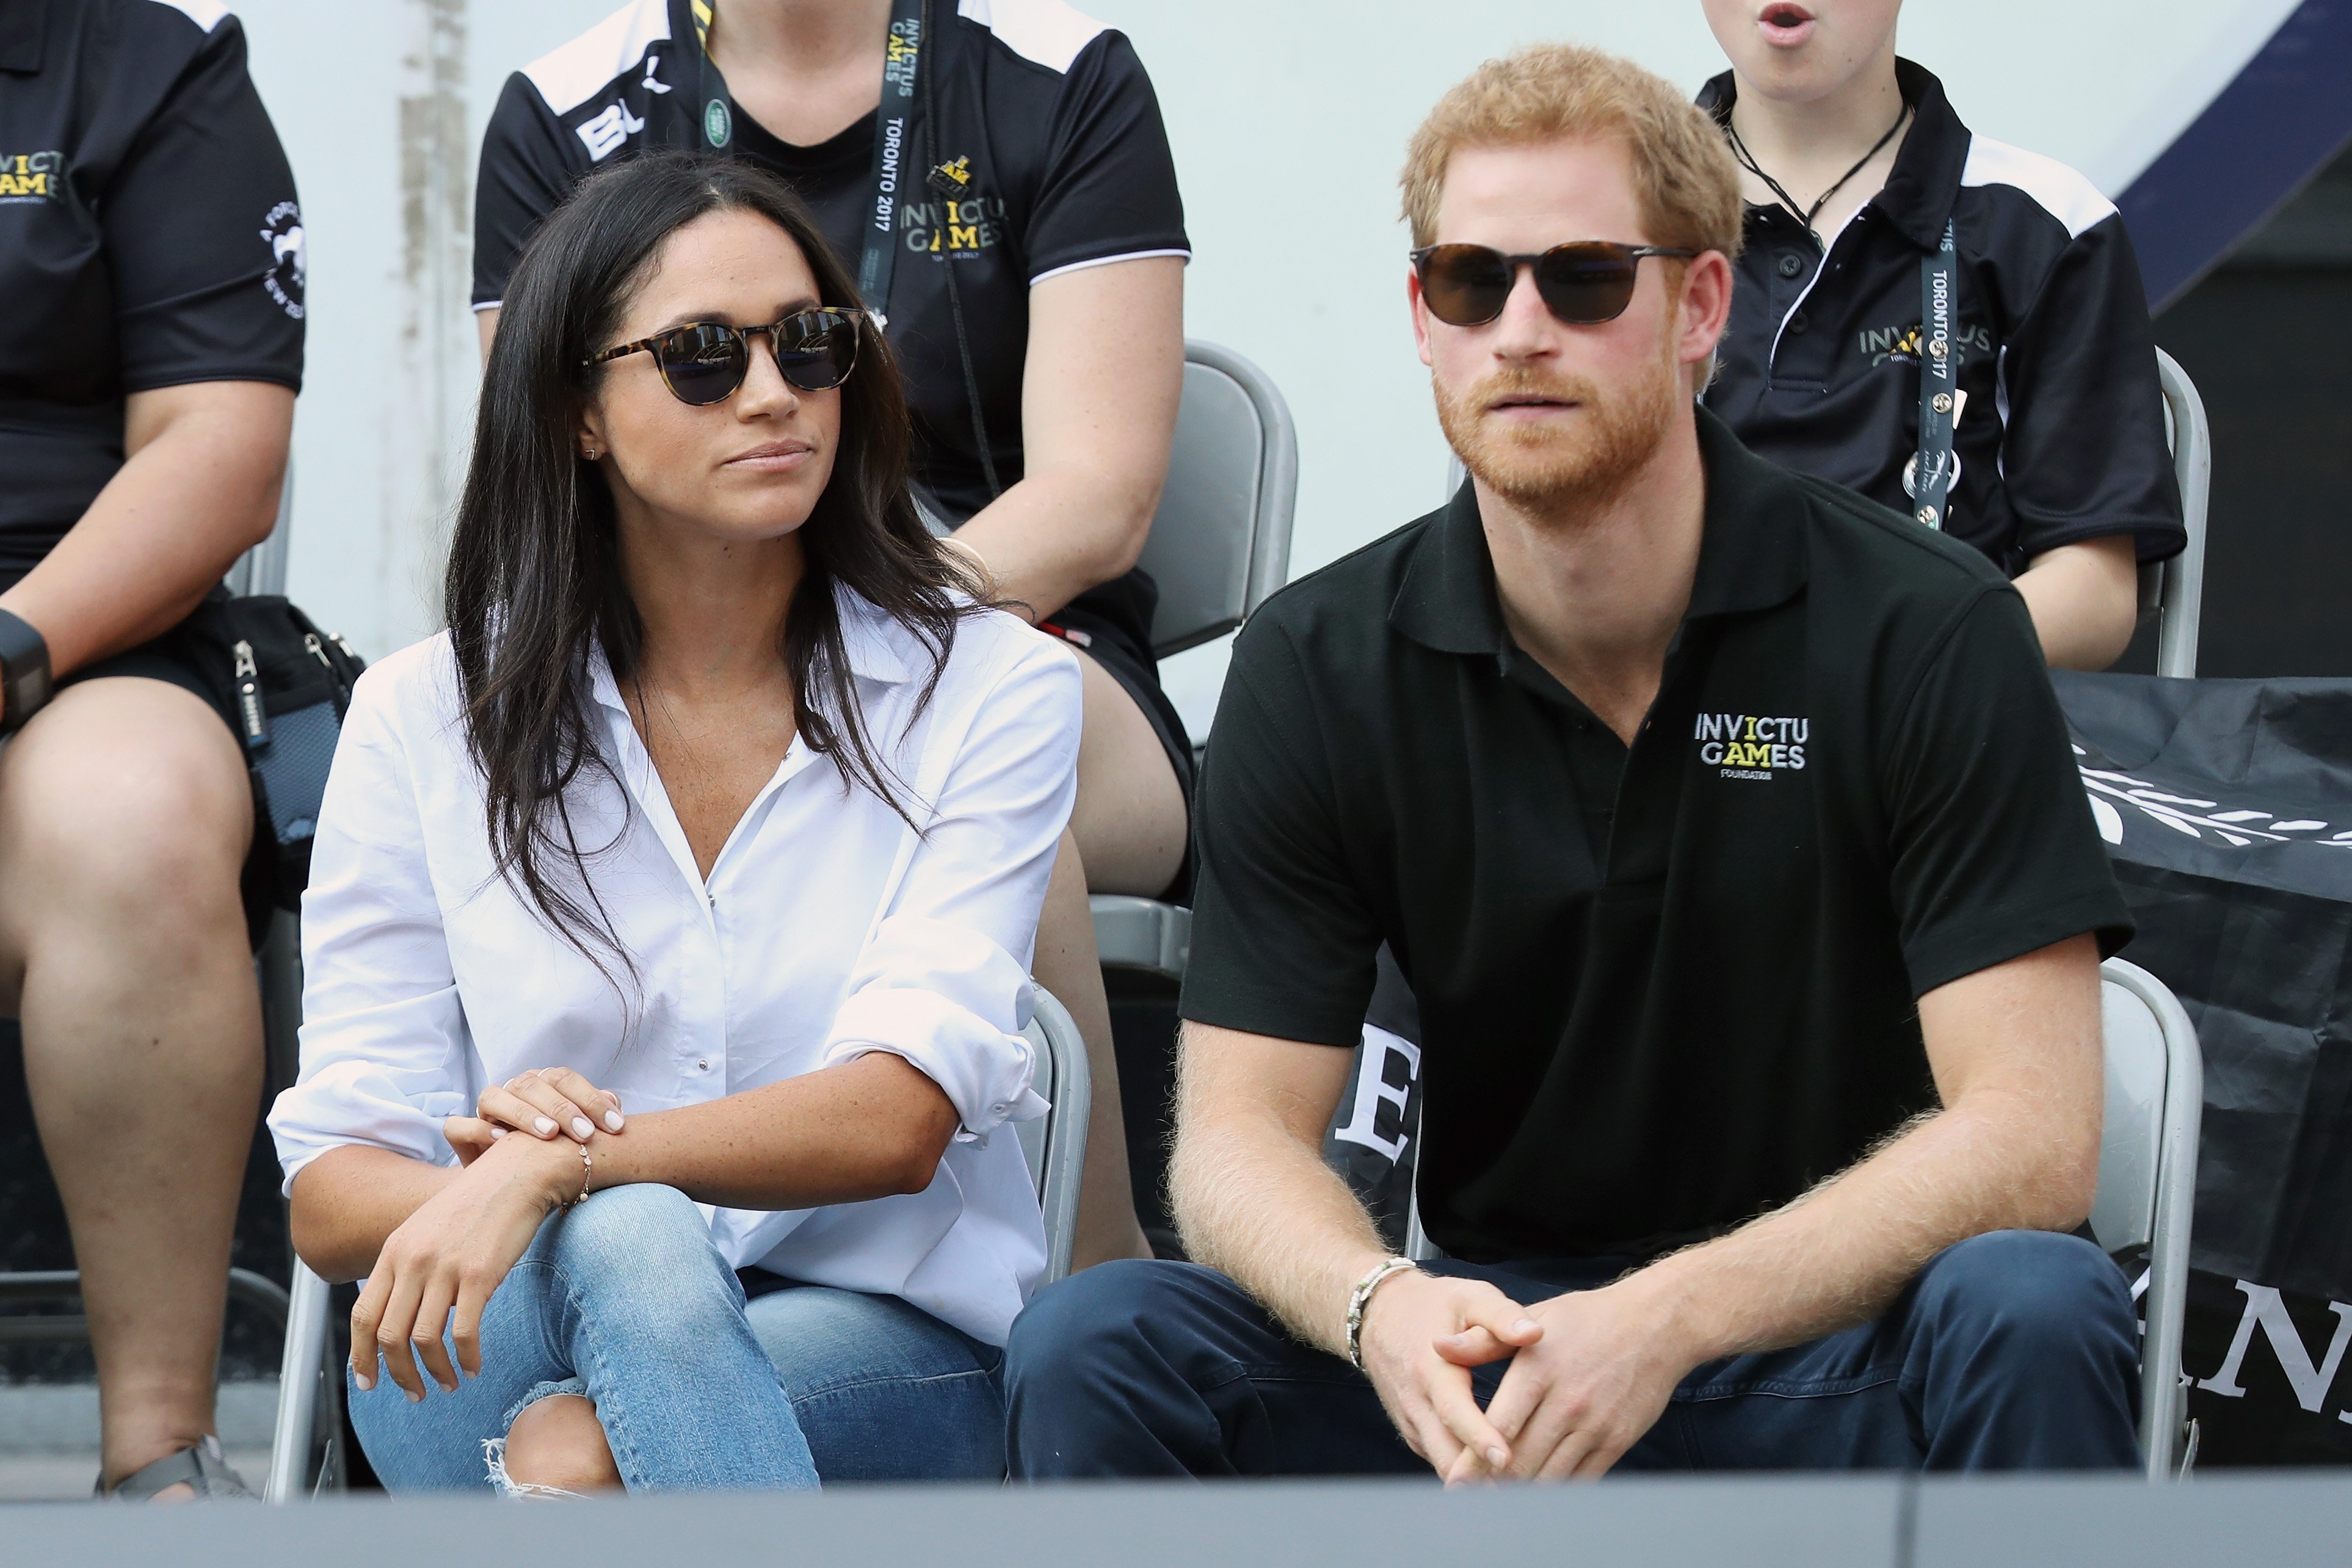 Body Language Expert Says Meghan Markle and Prince Harry Were ‘In a State of Panic’ During Their ‘Freedom Flight’: ‘They Felt Exposed’